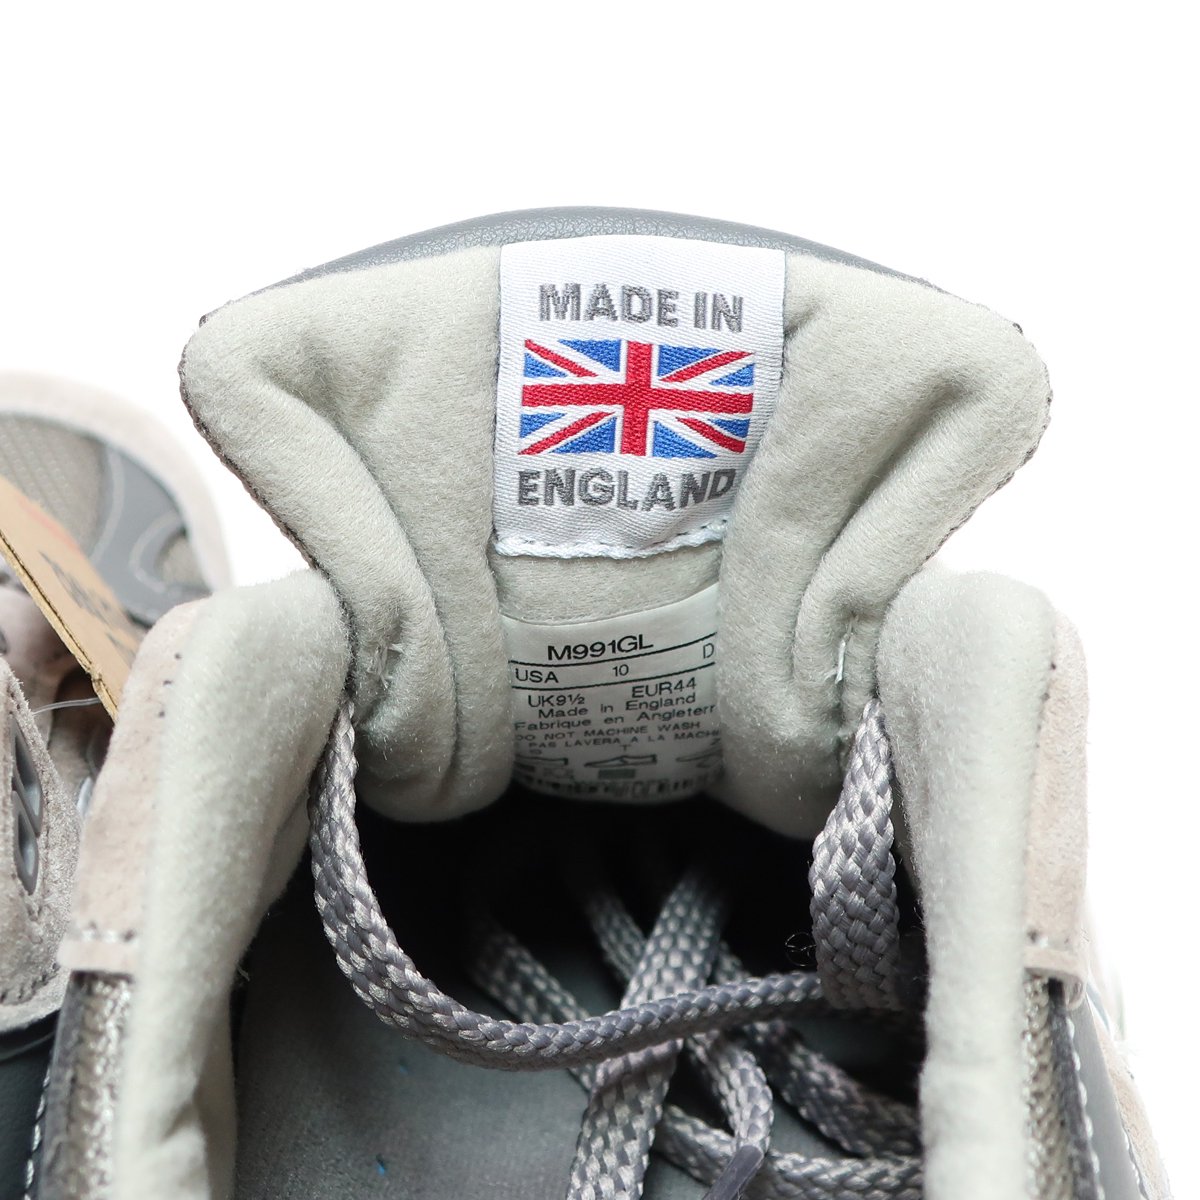 NEW BALANCE M991GL GRAY GREY SUEDE MADE IN ENGLAND